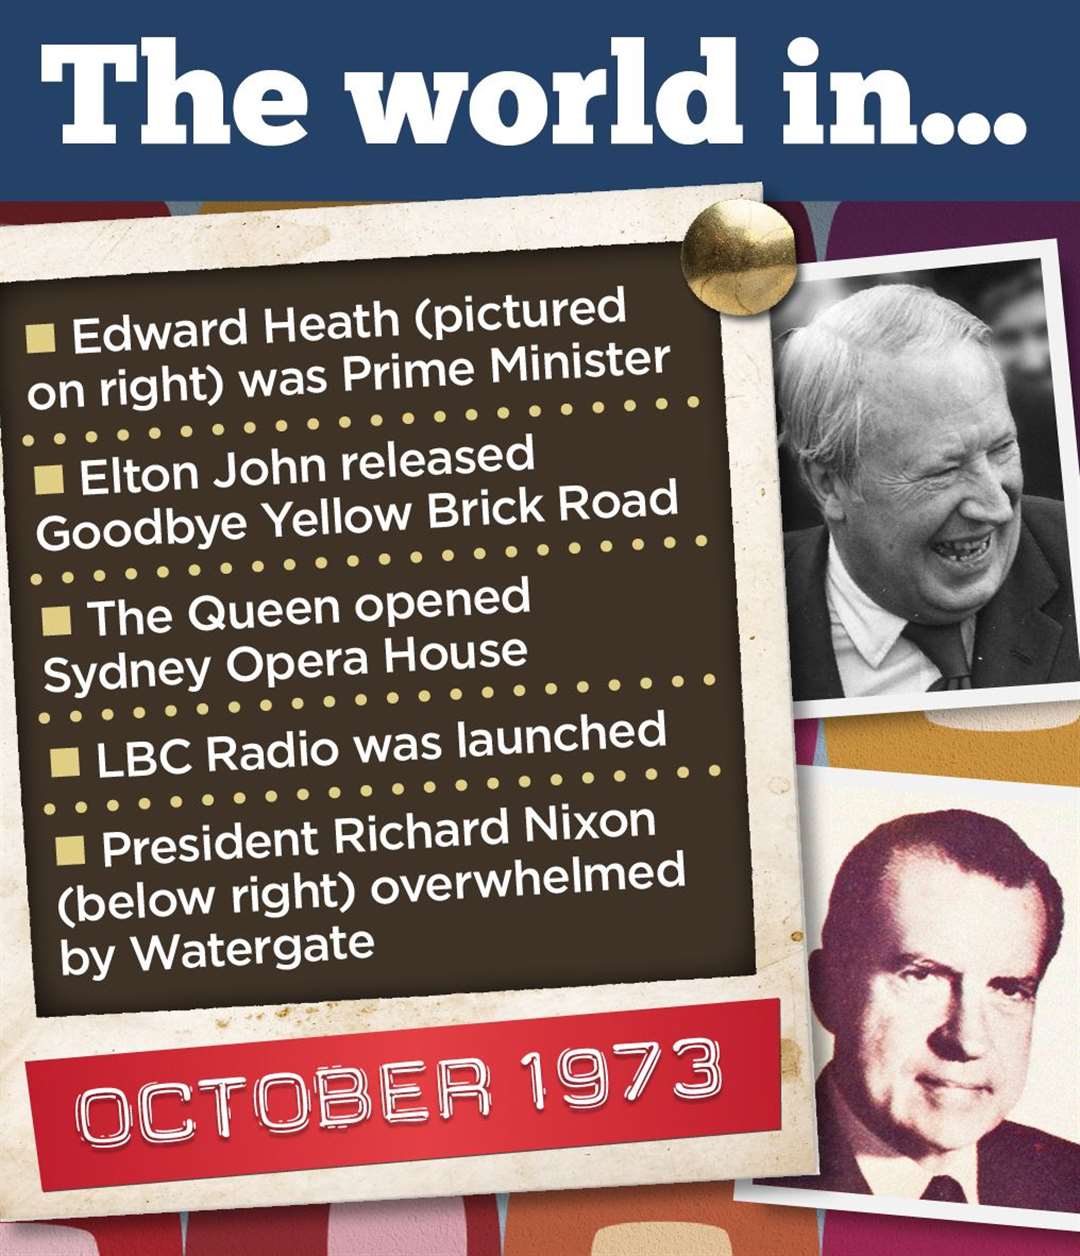 Graphic showing October 1973 events